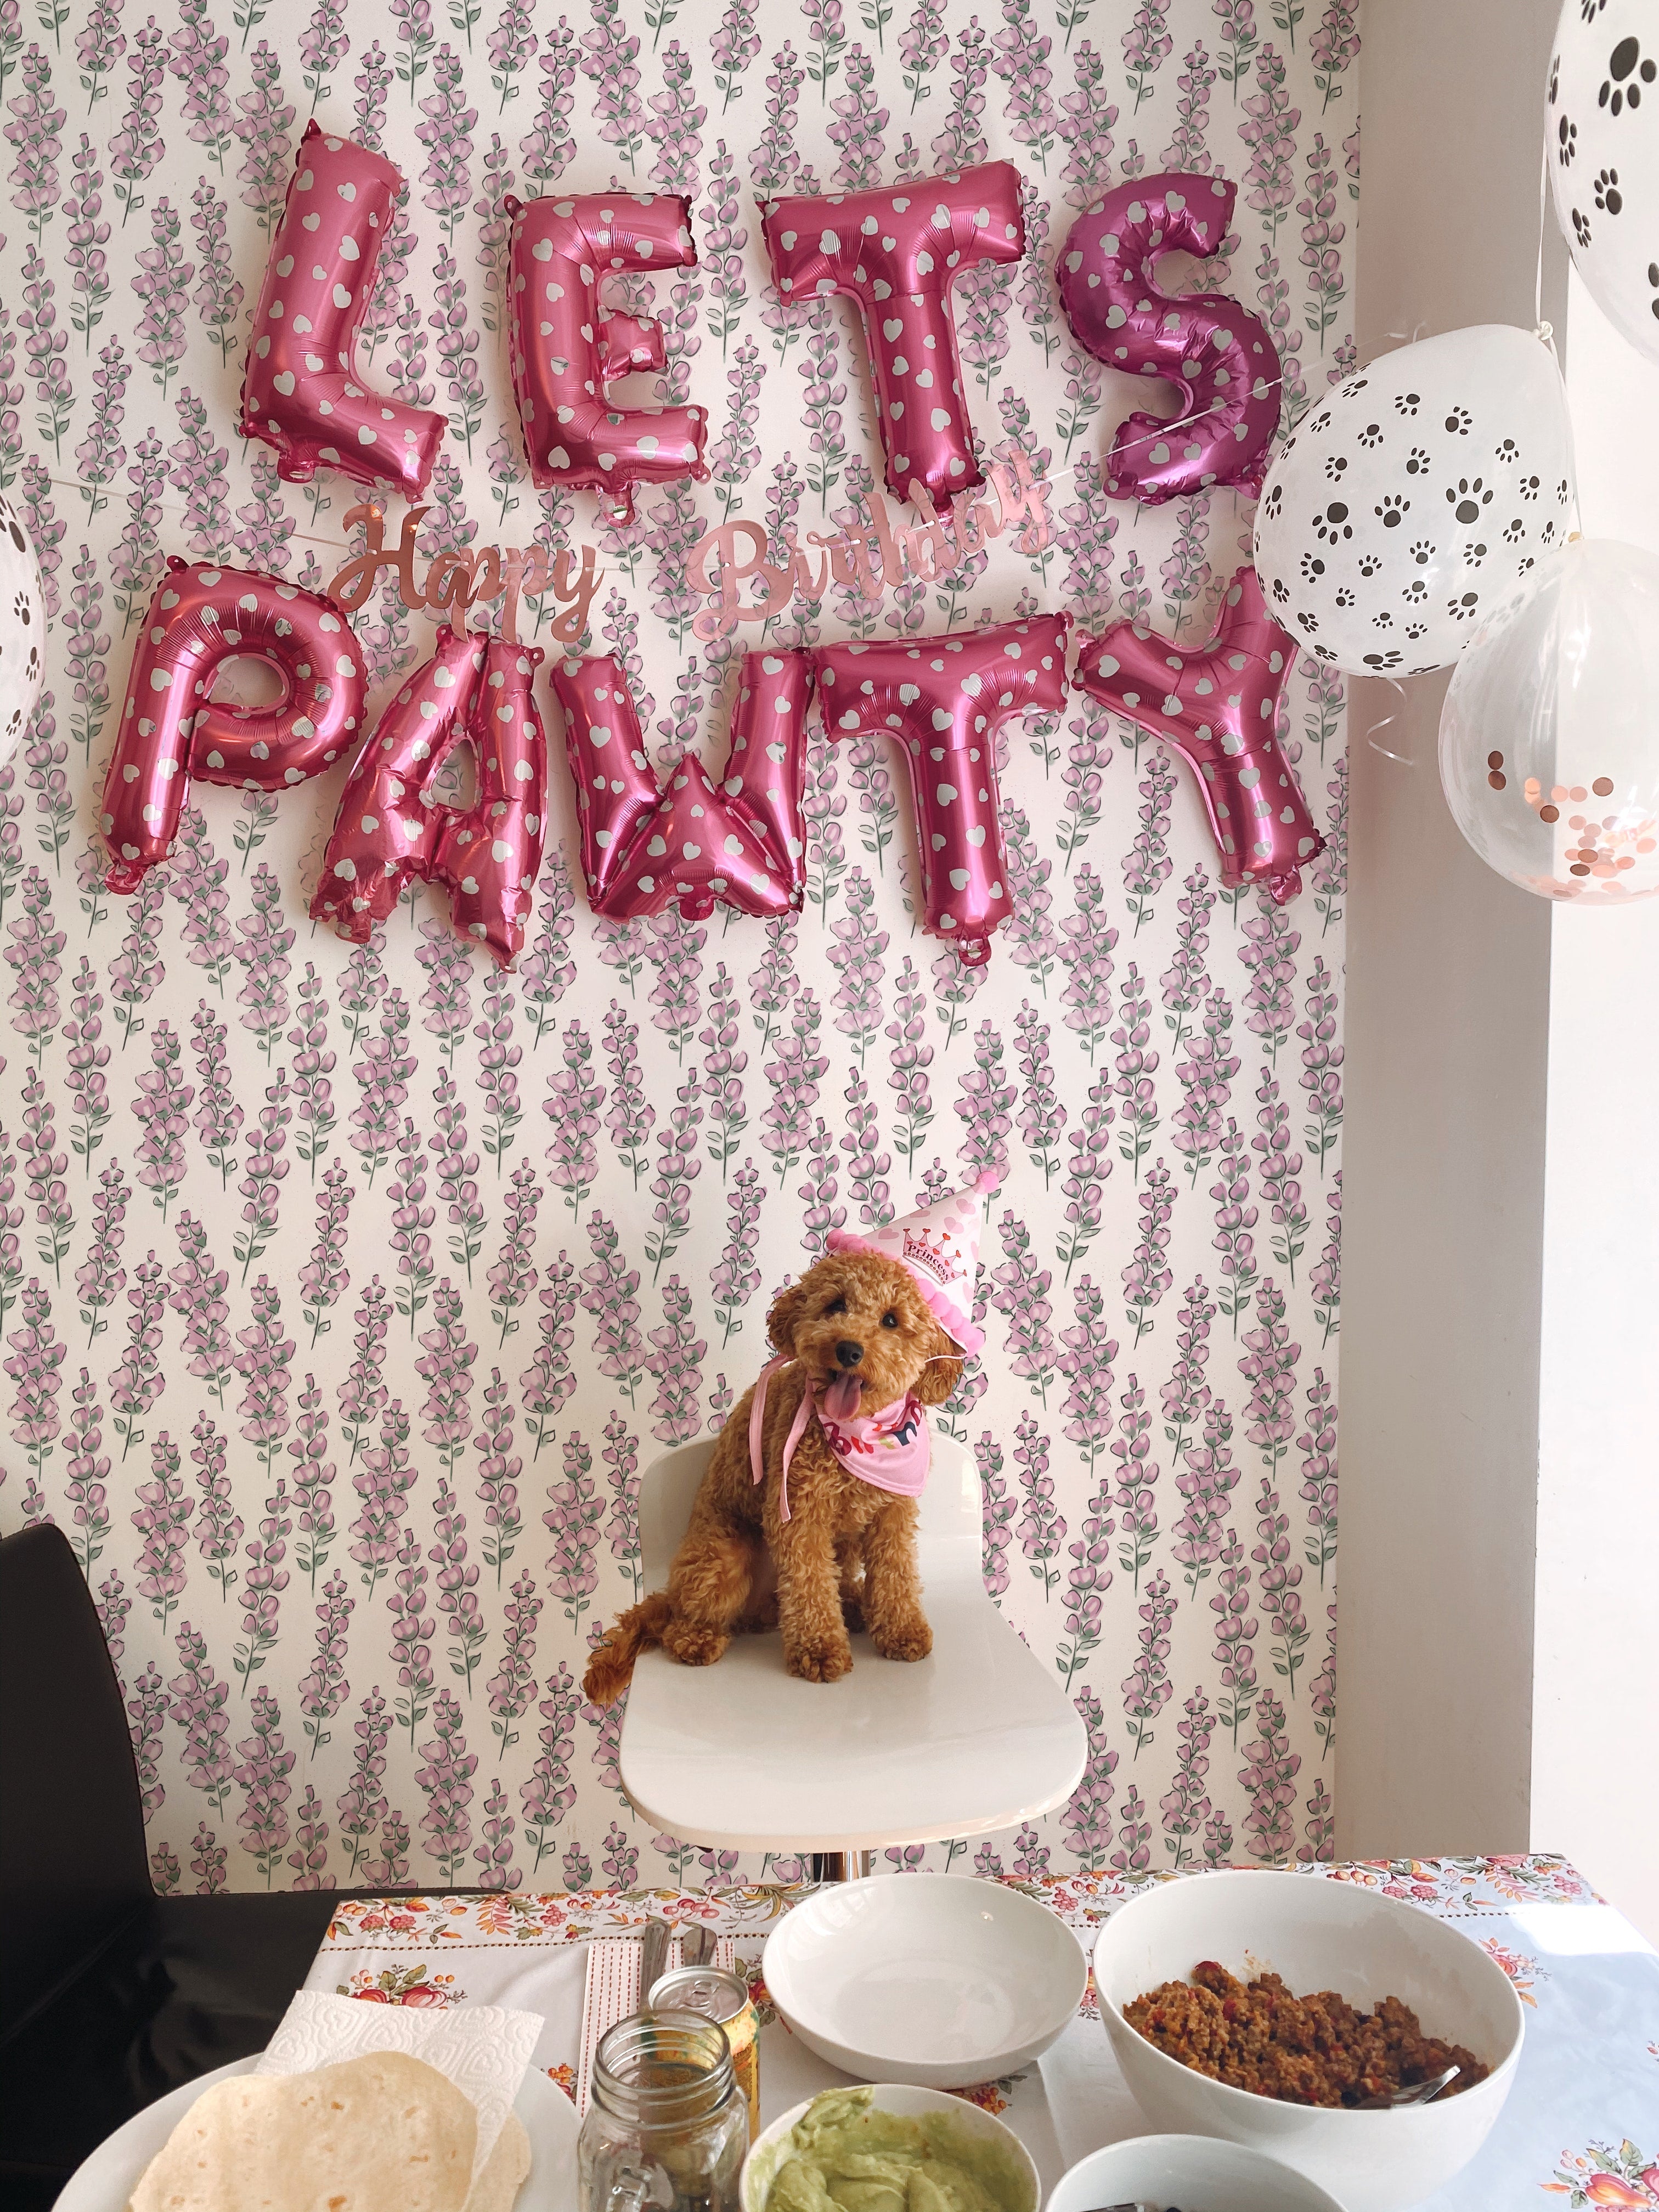 A playful nursery scene with the "Elegant Nursery Wallpaper" as a backdrop, featuring a dog with party hats under pink balloon letters spelling "LET'S PAWTY" for a birthday celebration, highlighting the versatility and charm of the wallpaper.